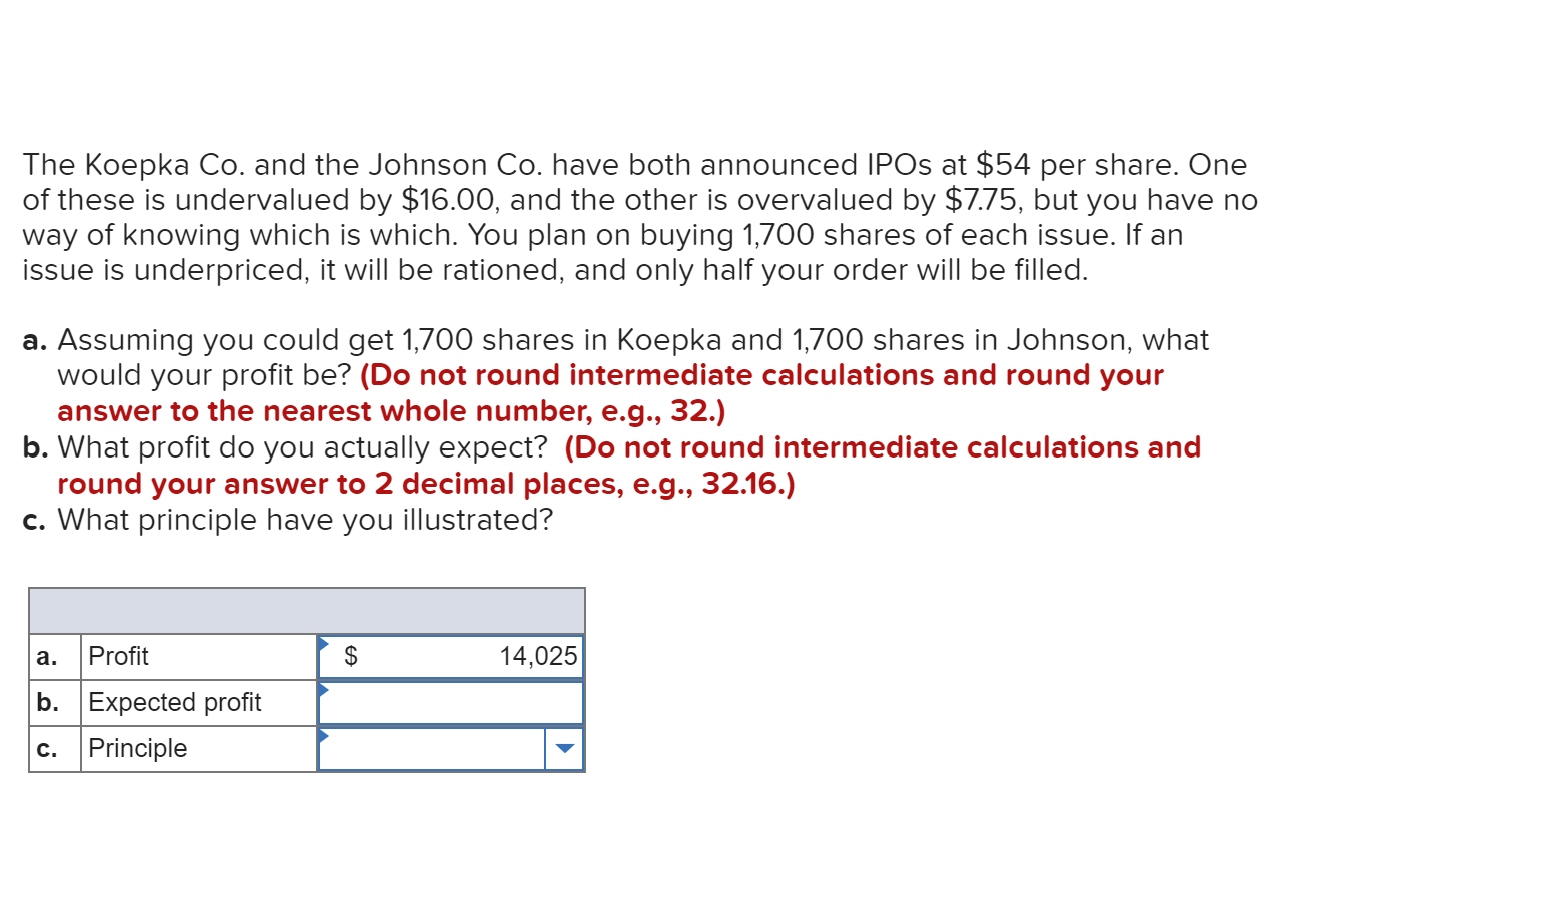 The Koepka Co. and the Johnson Co. have both announced IPOS at $54 per share. One
of these is undervalued by $16.00, and the other is overvalued by $7.75, but you have no
way of knowing which is which. You plan on buying 1,700 shares of each issue. If an
issue is underpriced, it will be rationed, and only half your order will be filled.
a. Assuming you could get 1,700 shares in Koepka and 1,700 shares in Johnson, what
would your profit be? (Do not round intermediate calculations and round your
answer to the nearest whole number, e.g., 32.)
b. What profit do you actually expect? (Do not round intermediate calculations and
round your answer to 2 decimal places, e.g., 32.16.)
c. What principle have you illustrated?
Profit
14,025
a.
b. Expected profit
Principle
C.
